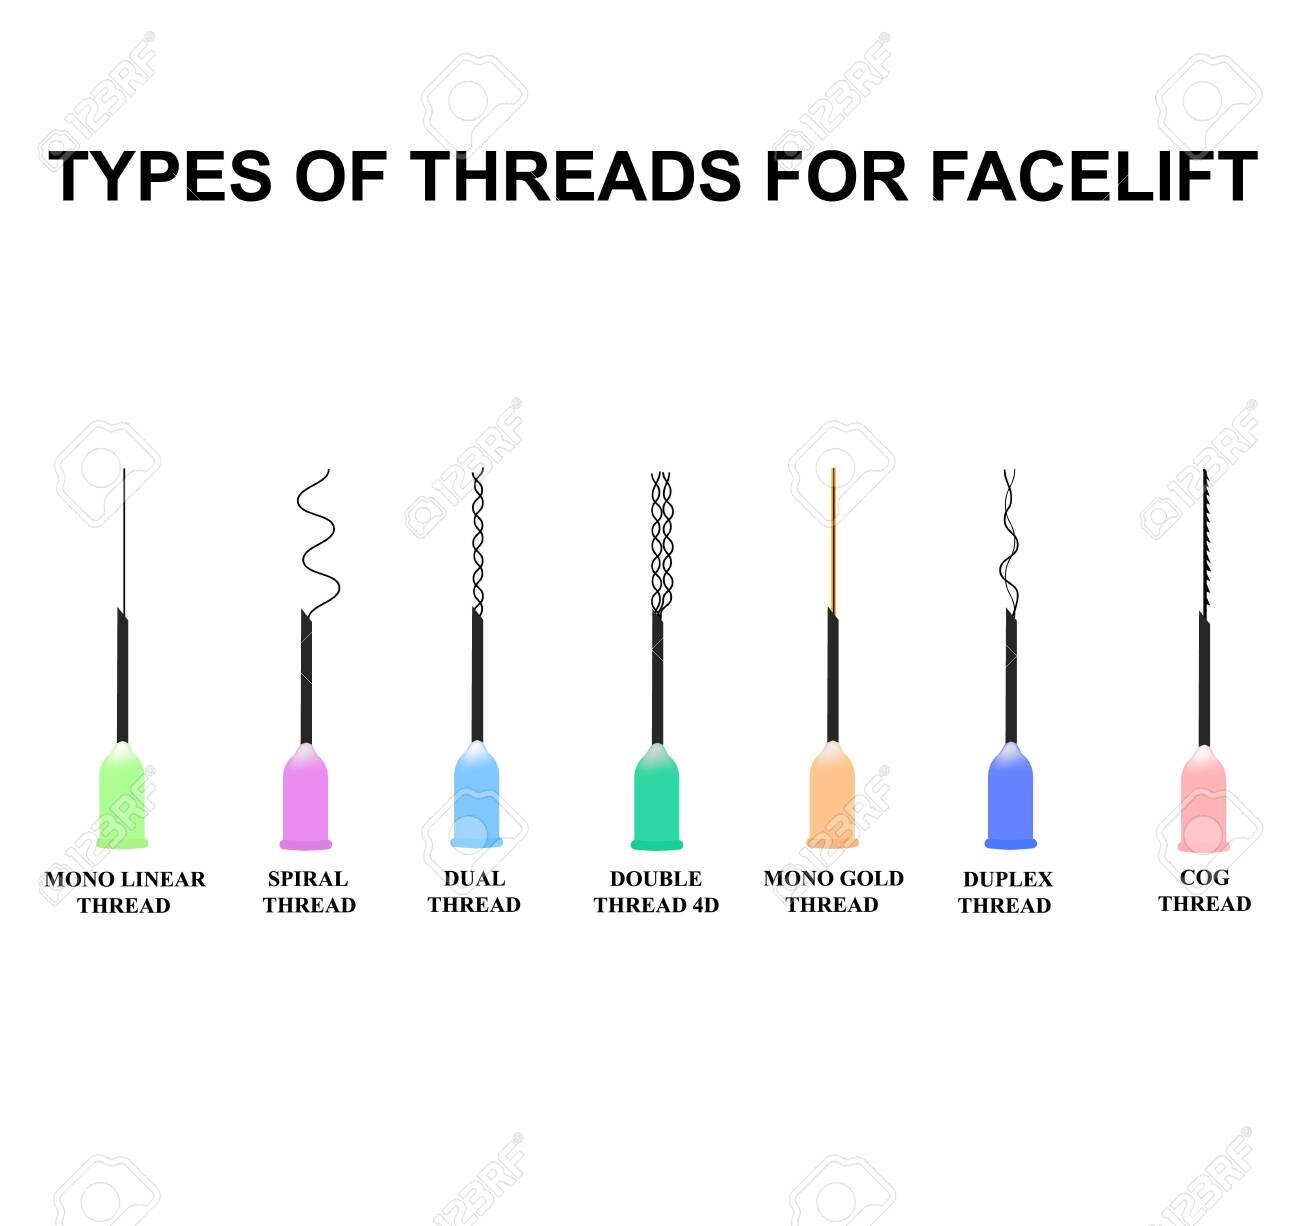 129661559-types-of-threads-for-facelift-mesotherapy-threads-lifting-different-types-of-threads-for-facelift-th.jpg